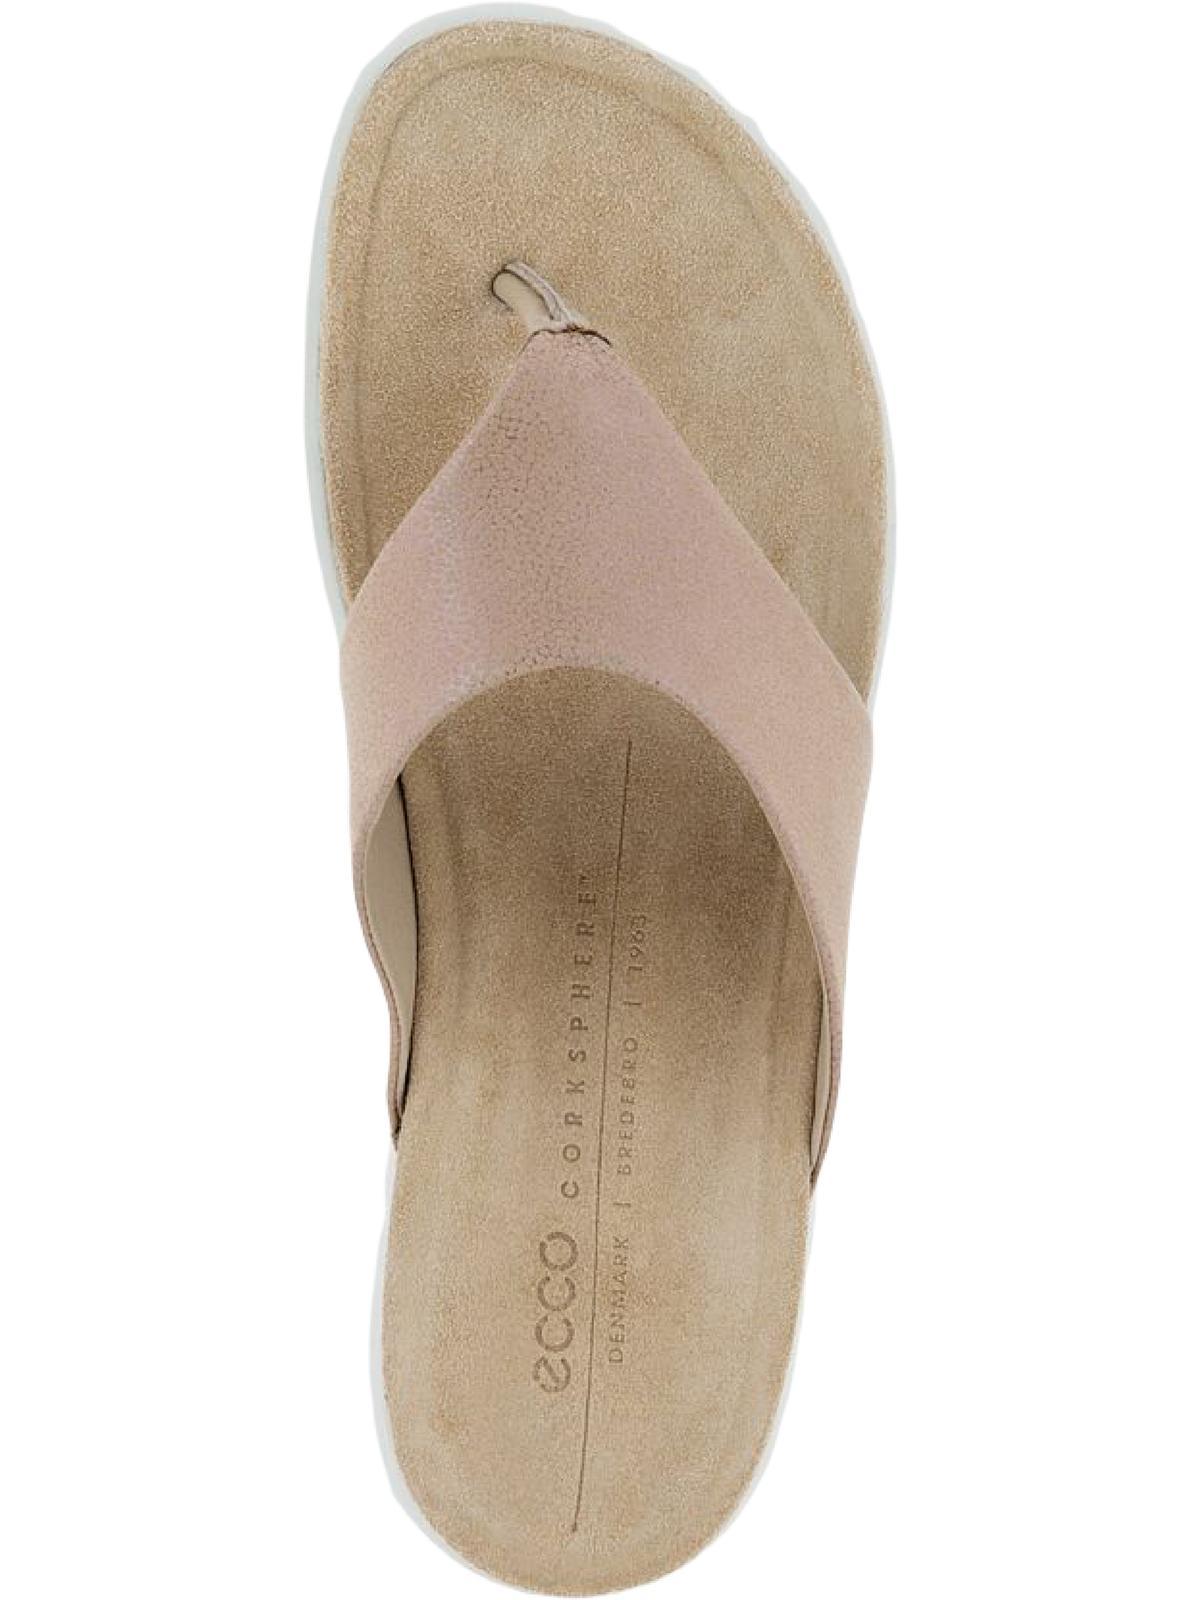 Ecco Corksphere Leather Cork Strap Sandals in Natural | Lyst